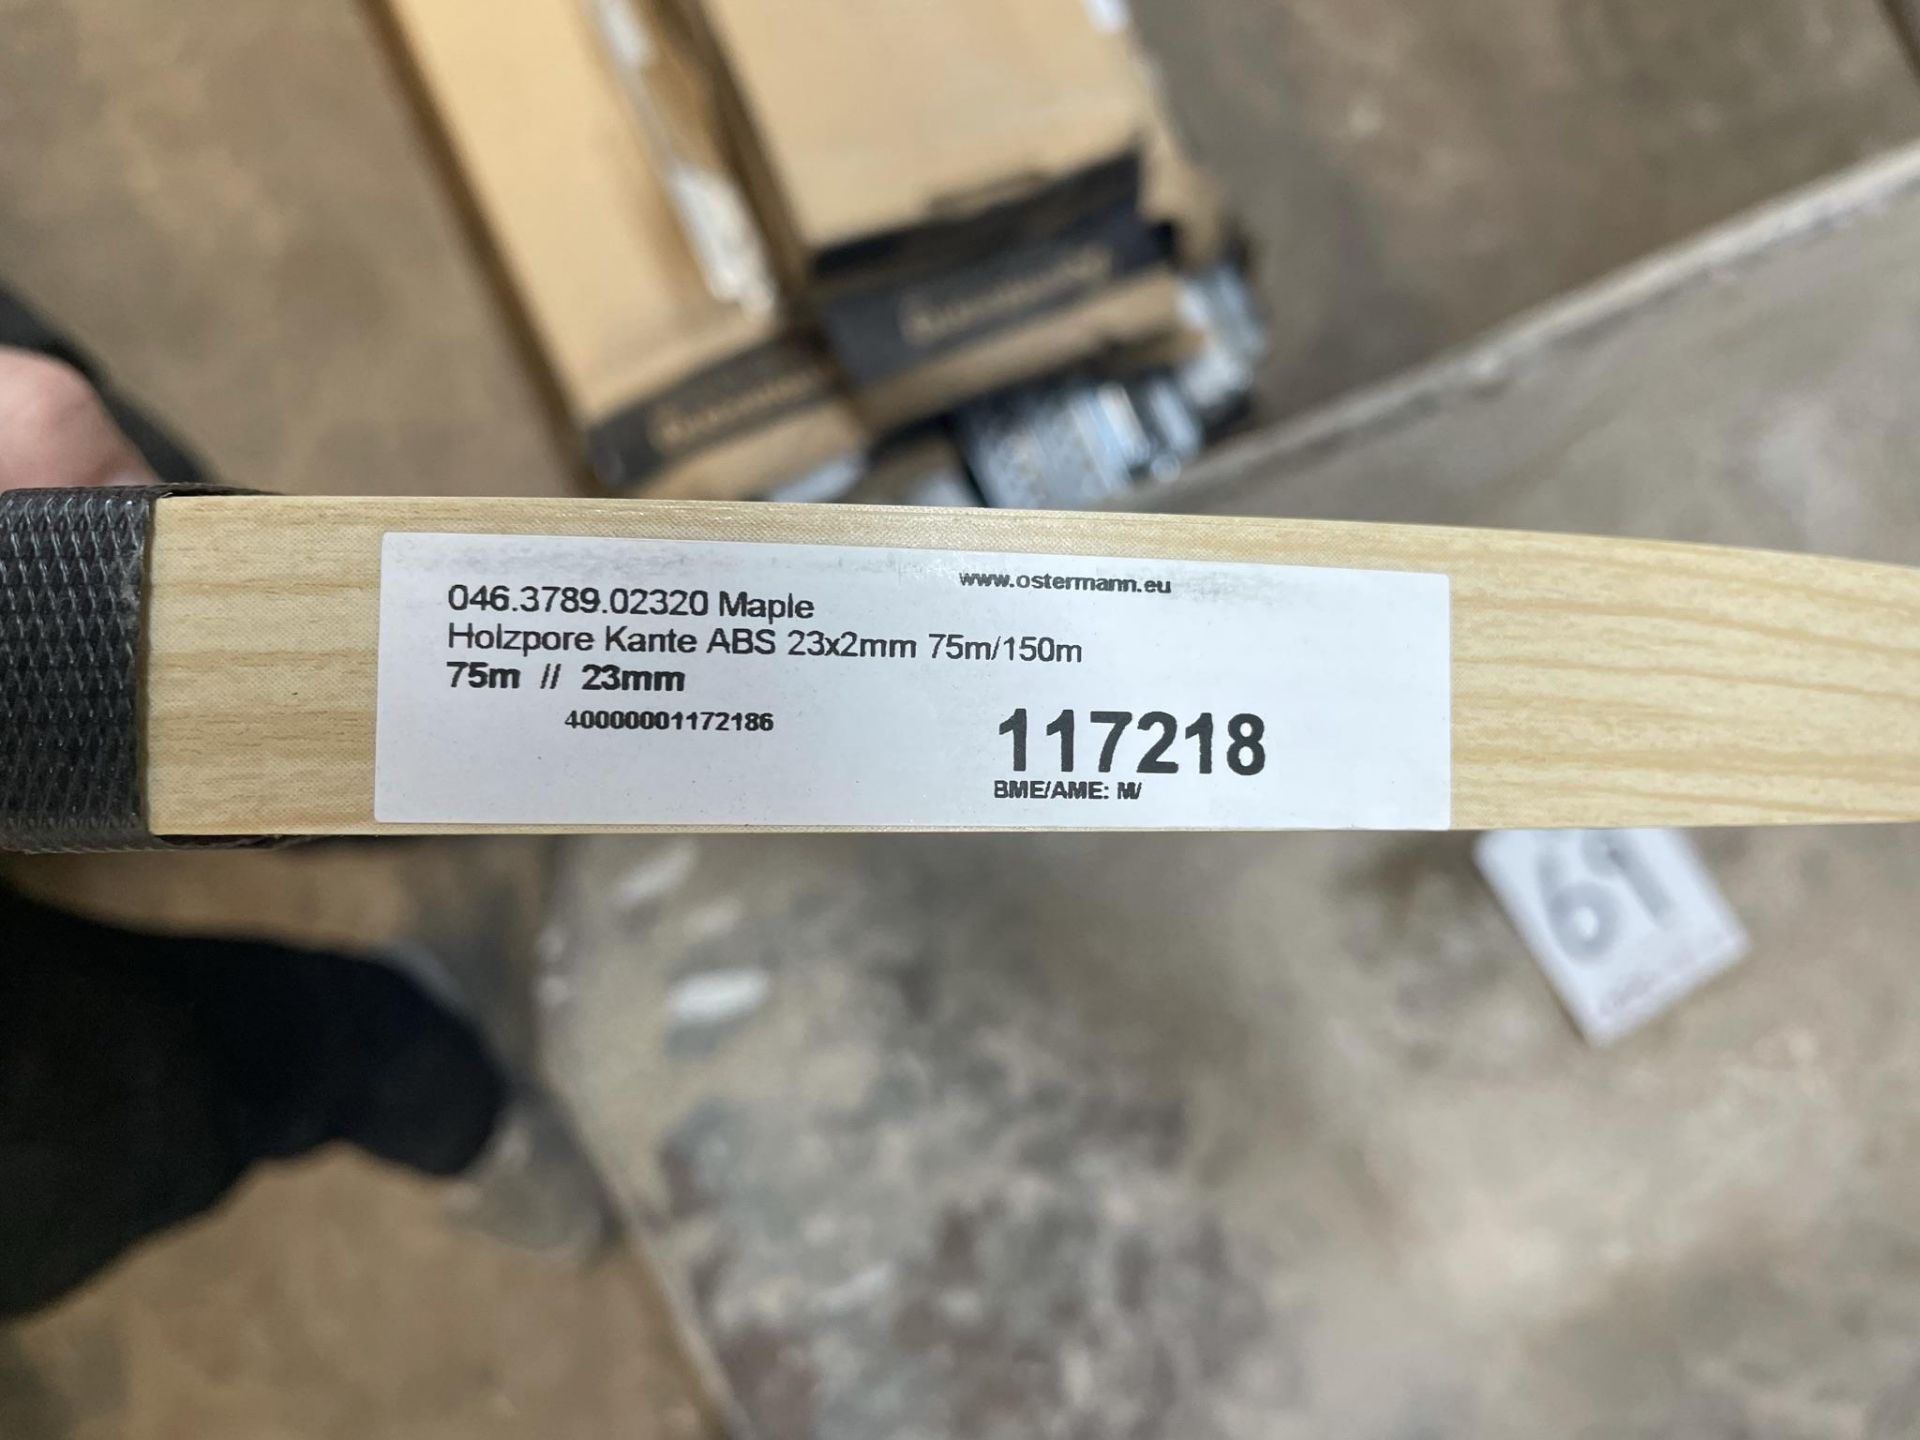 3 x Reels of 2mm Ostermann Maple Wooden Effect Edging Strip - Image 4 of 5